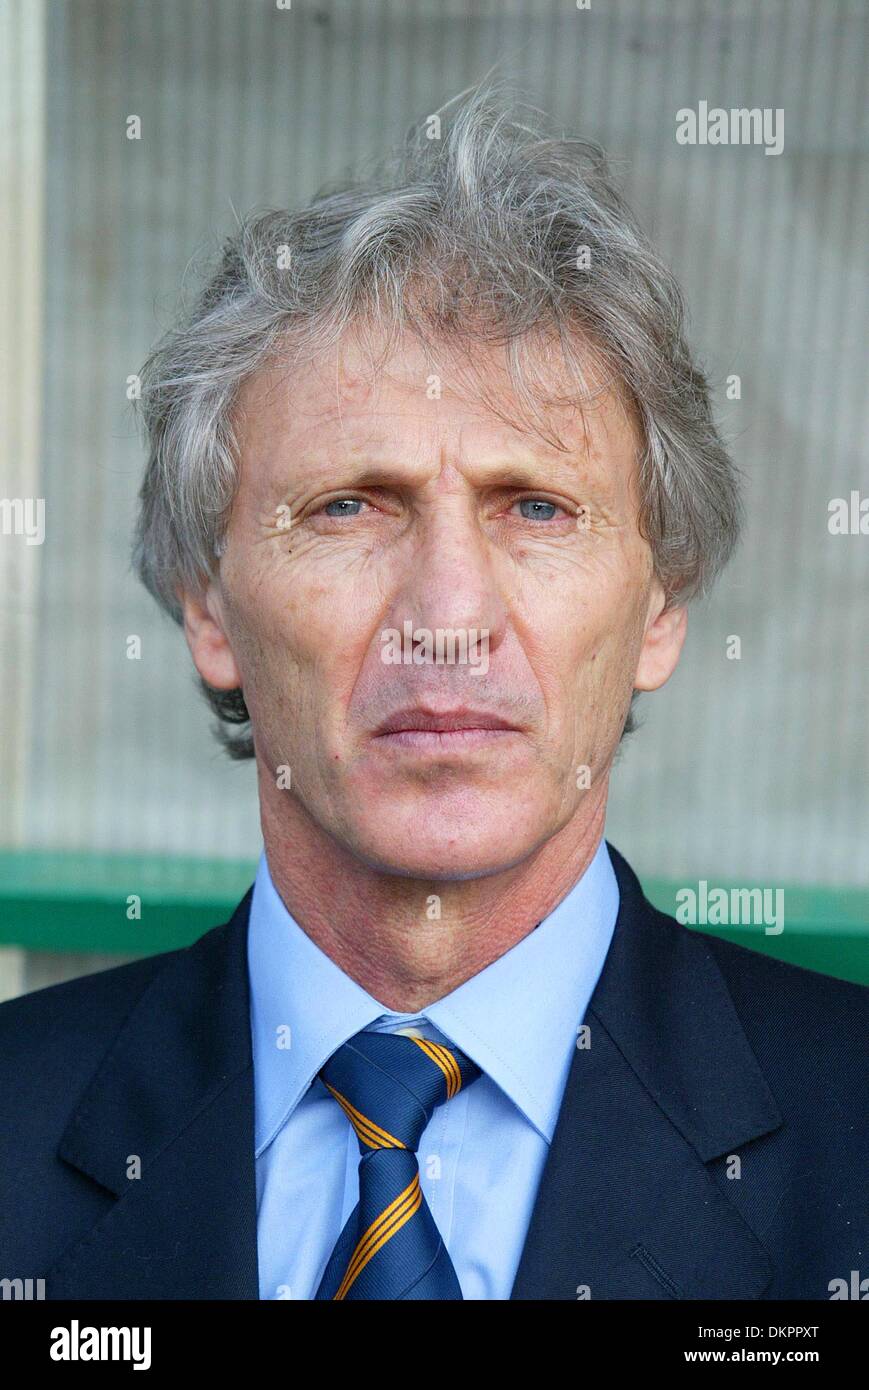 JOSE PEKERMAN.ARGENTINA HEAD MANAGER.HUNGARY V ARGENTINA.PUSKAS FERENC STADION, BUDAPEST, HUNGARY.17/08/2005.DII35513.K47872.WORLD CUP PREWIEW 2006 Stock Photo